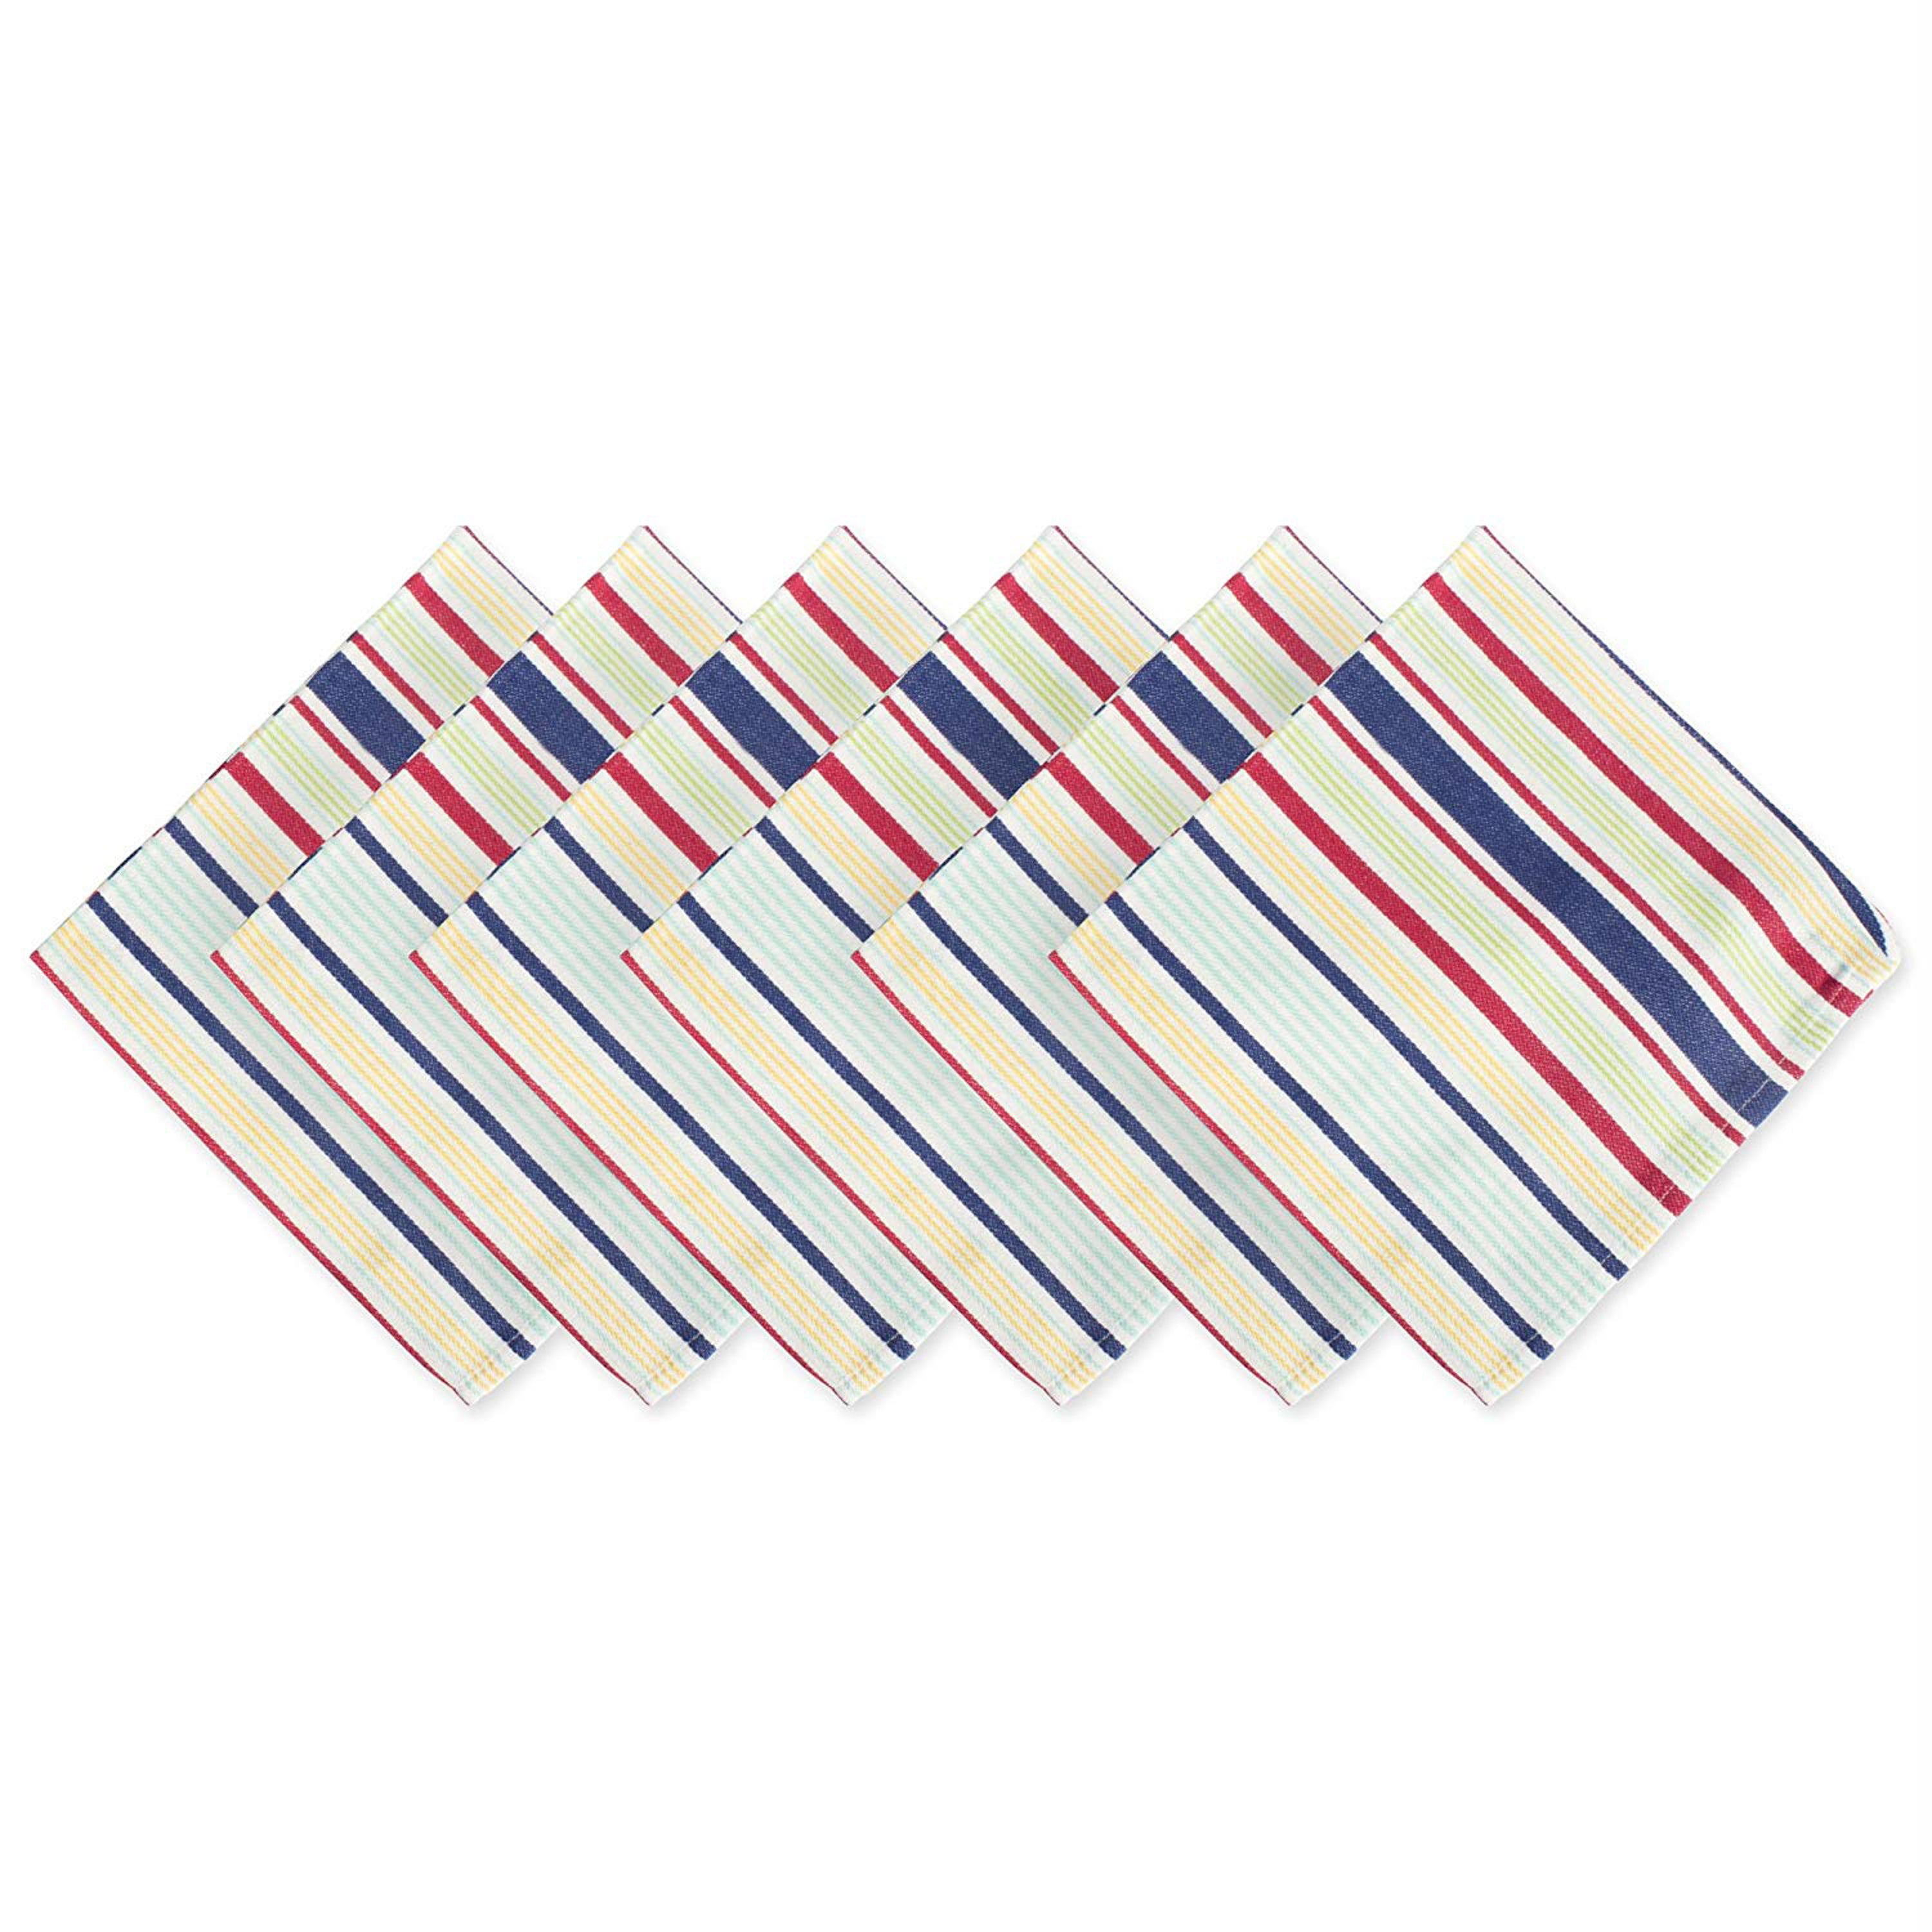 Basic Primary Saturated Stripe Napkin Set of 6 – DII Home Store